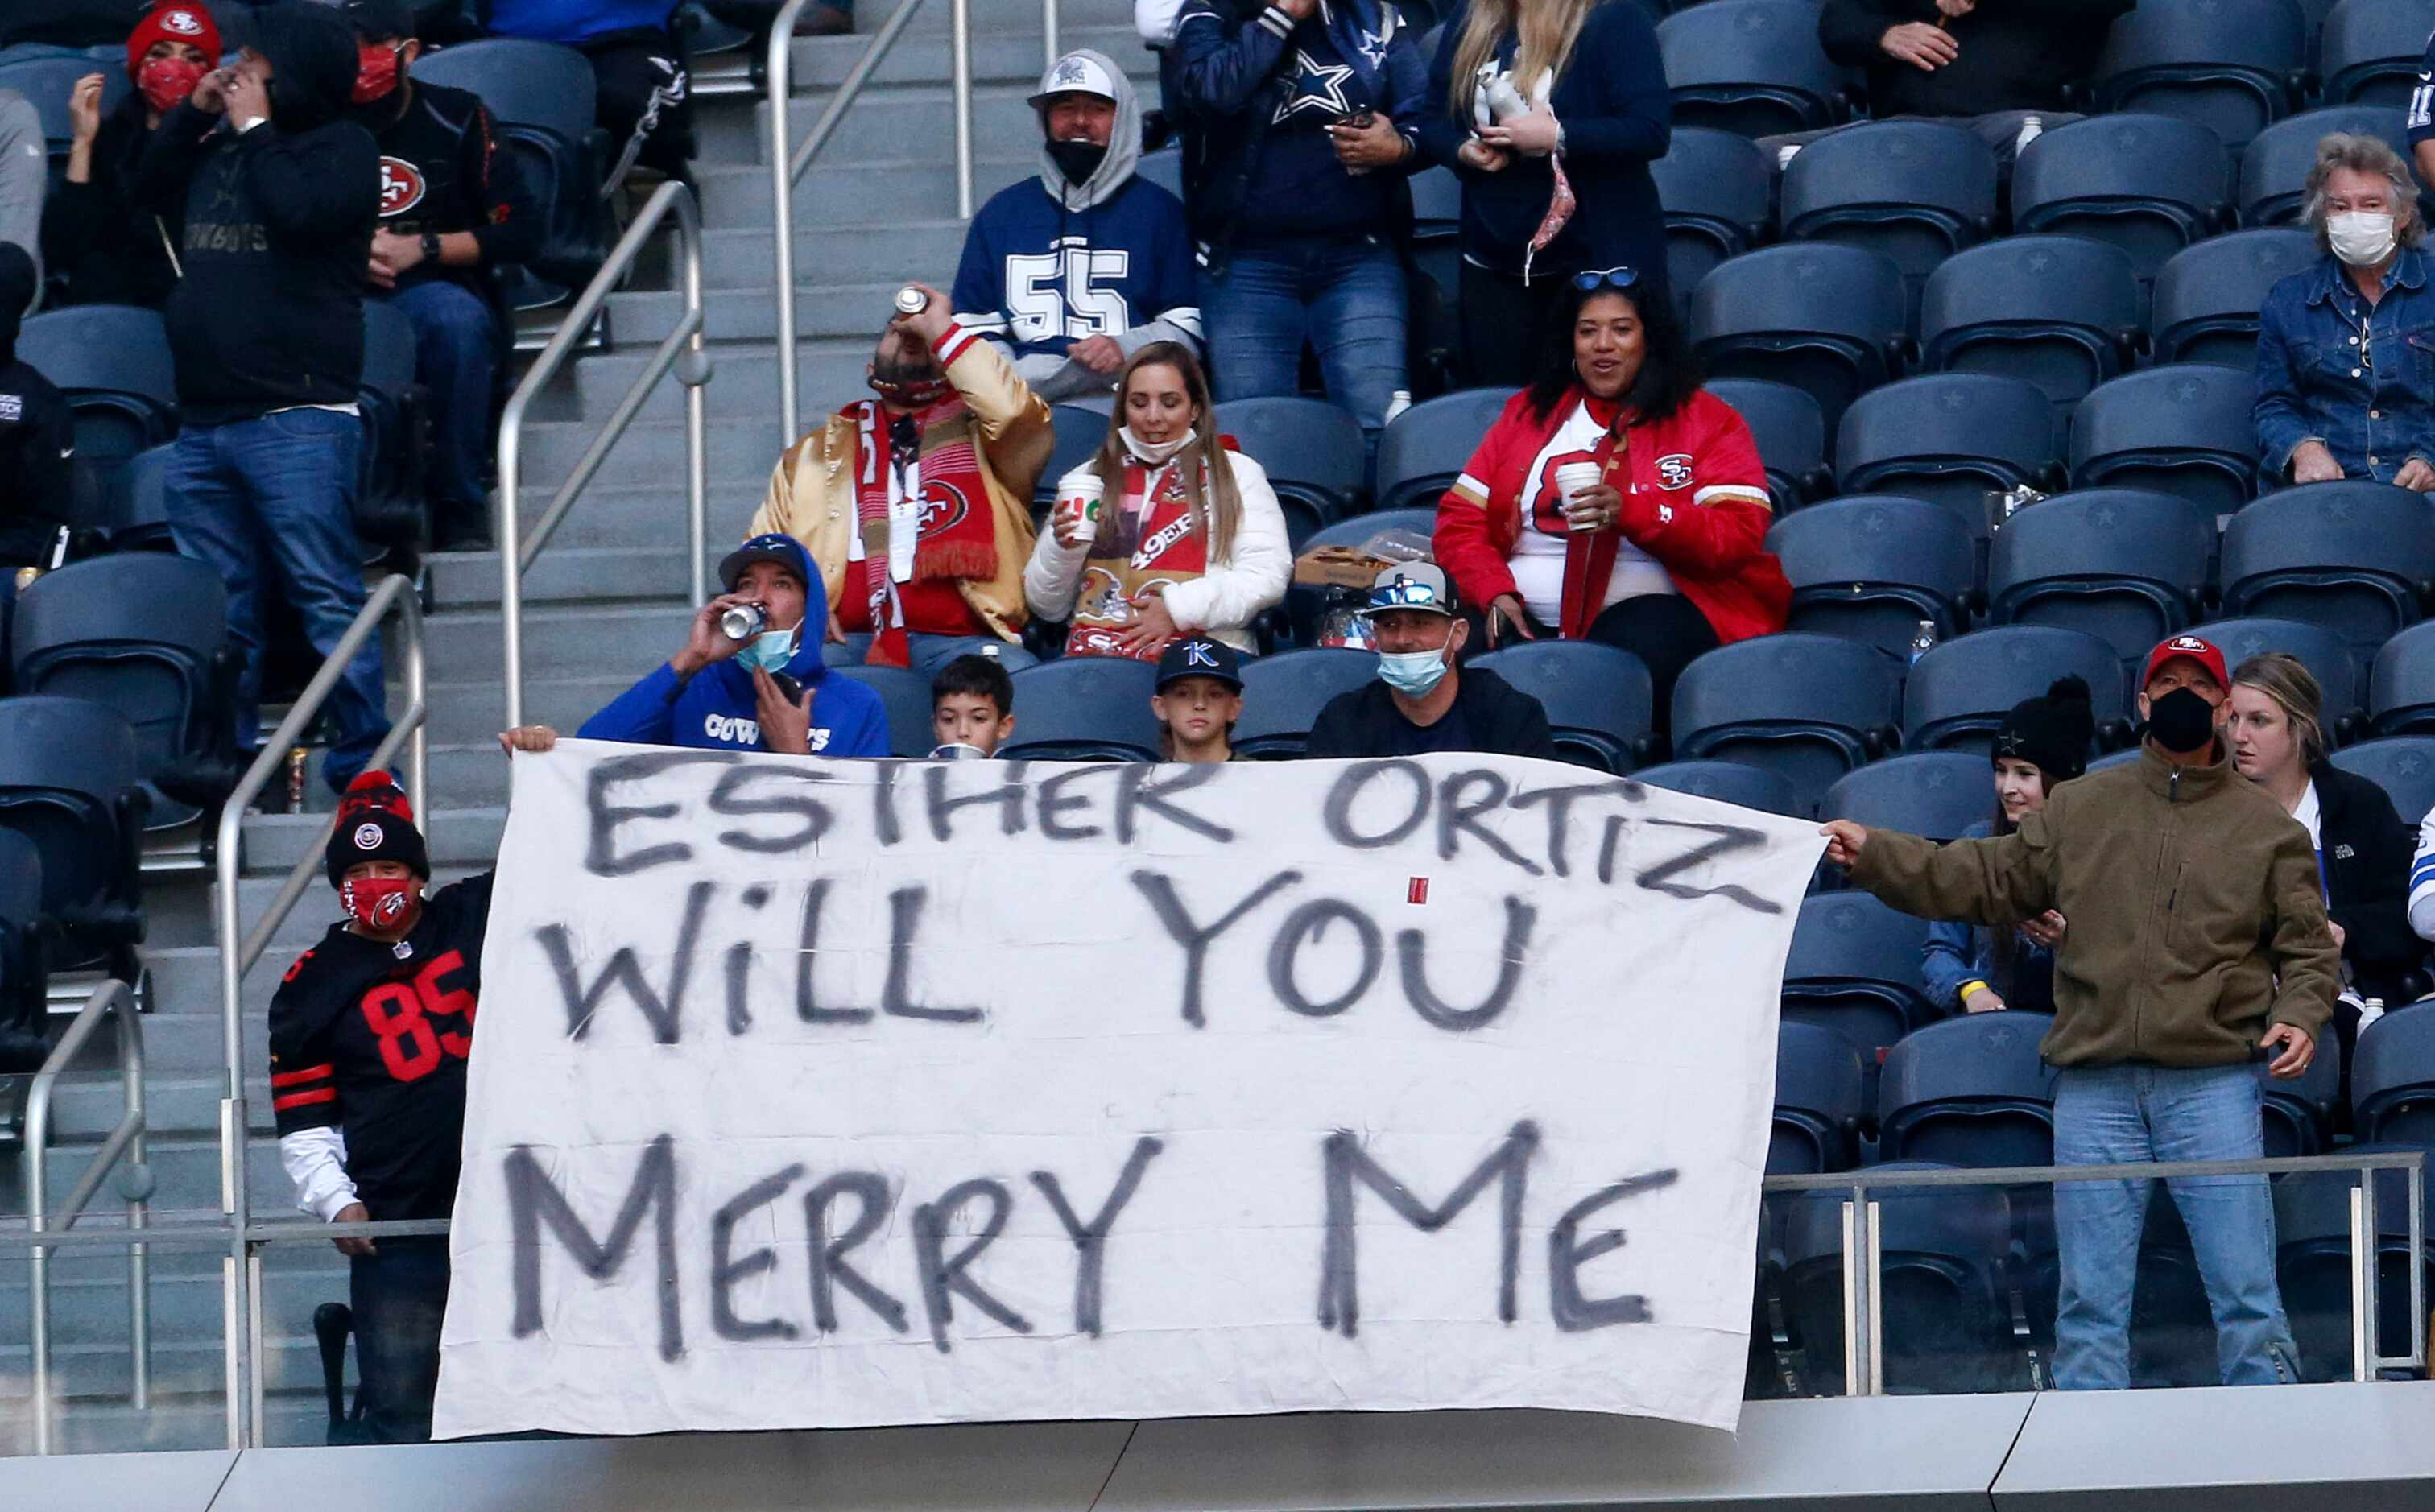 Fans hold up a sign for Esther Ortiz for possible proposal or holiday style proposal during...